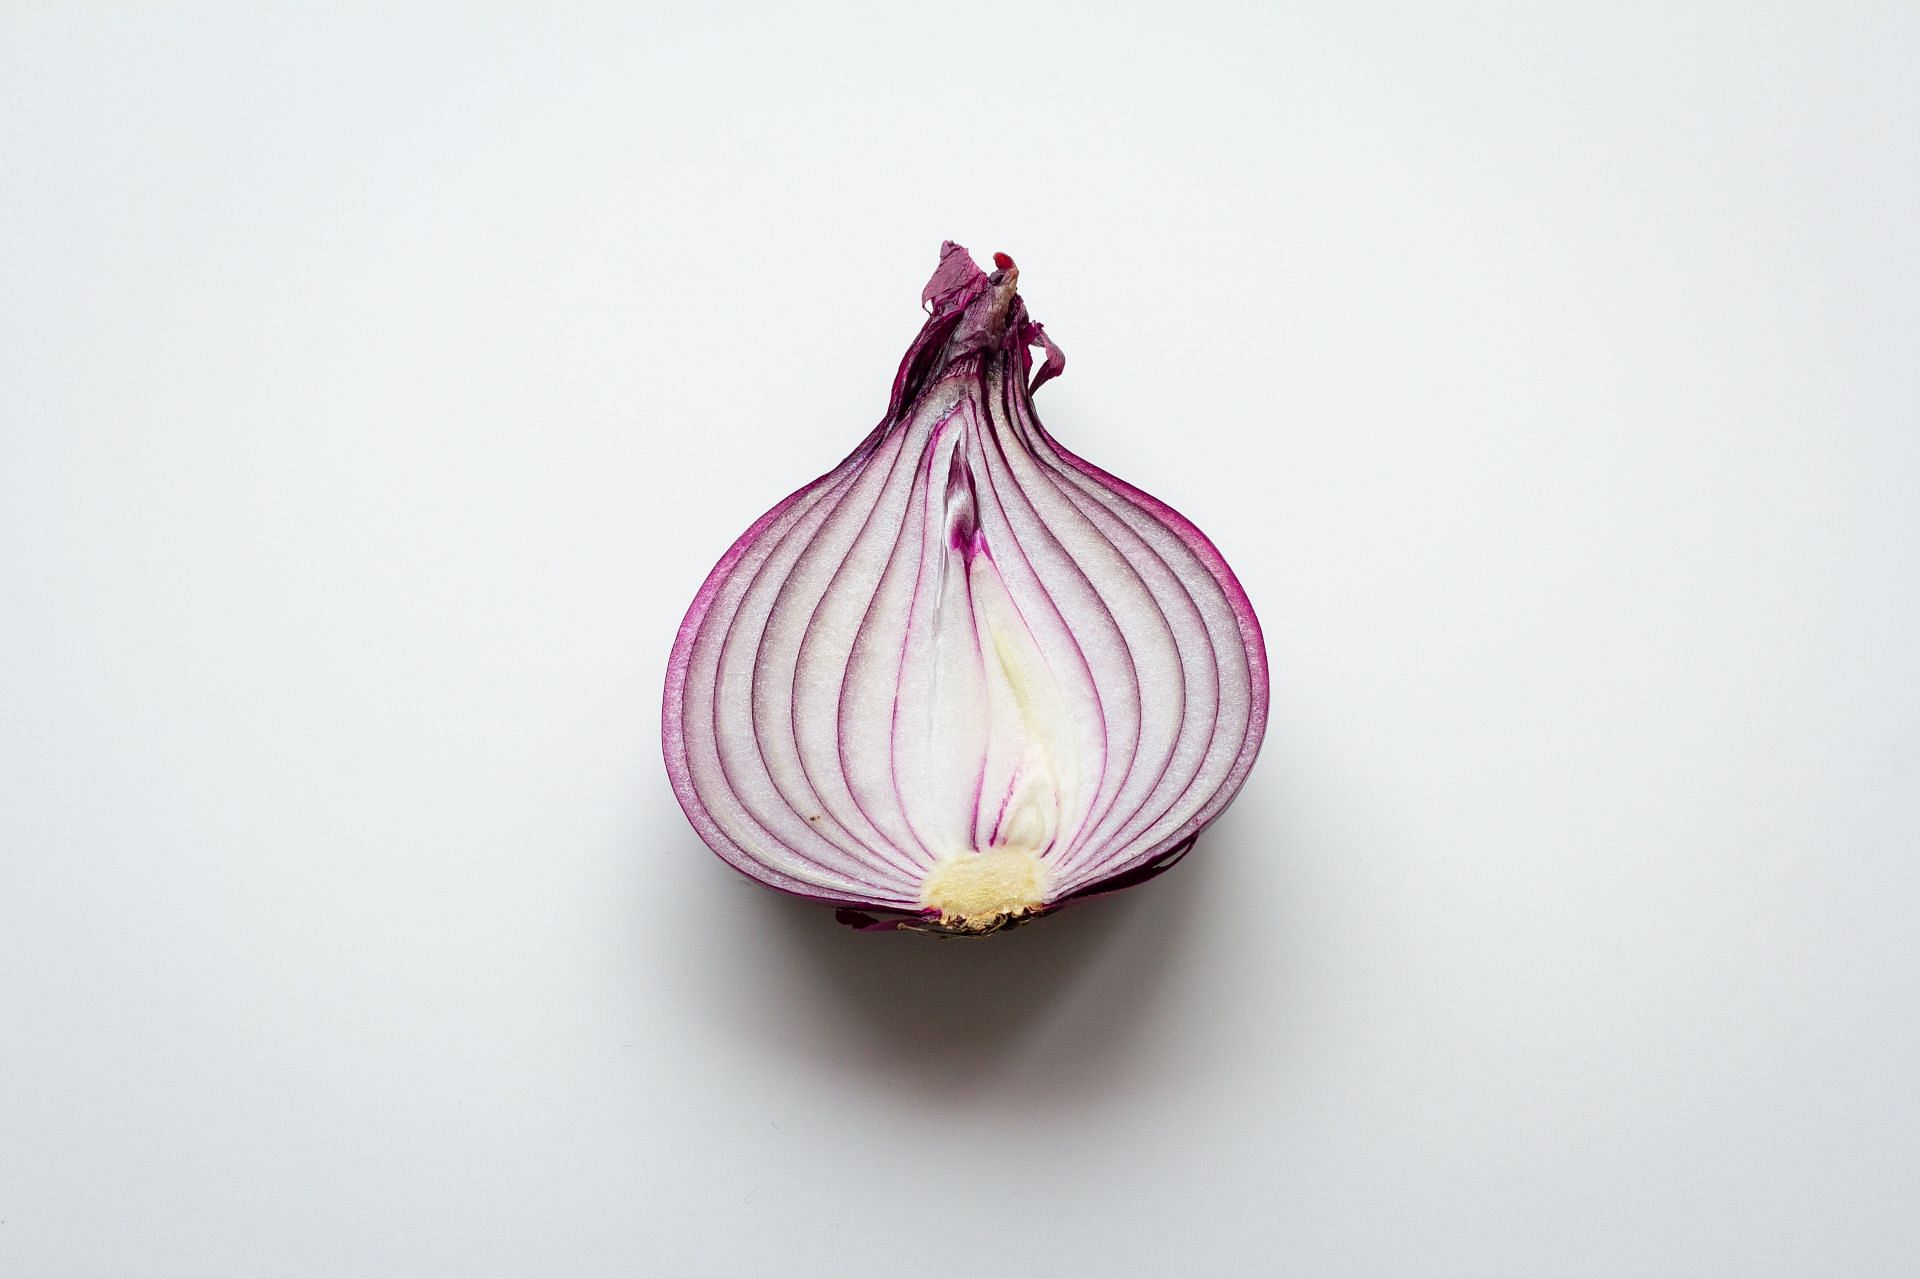 Onion contains various compounds that help in hair growth. (Image via Unsplash/ K8)